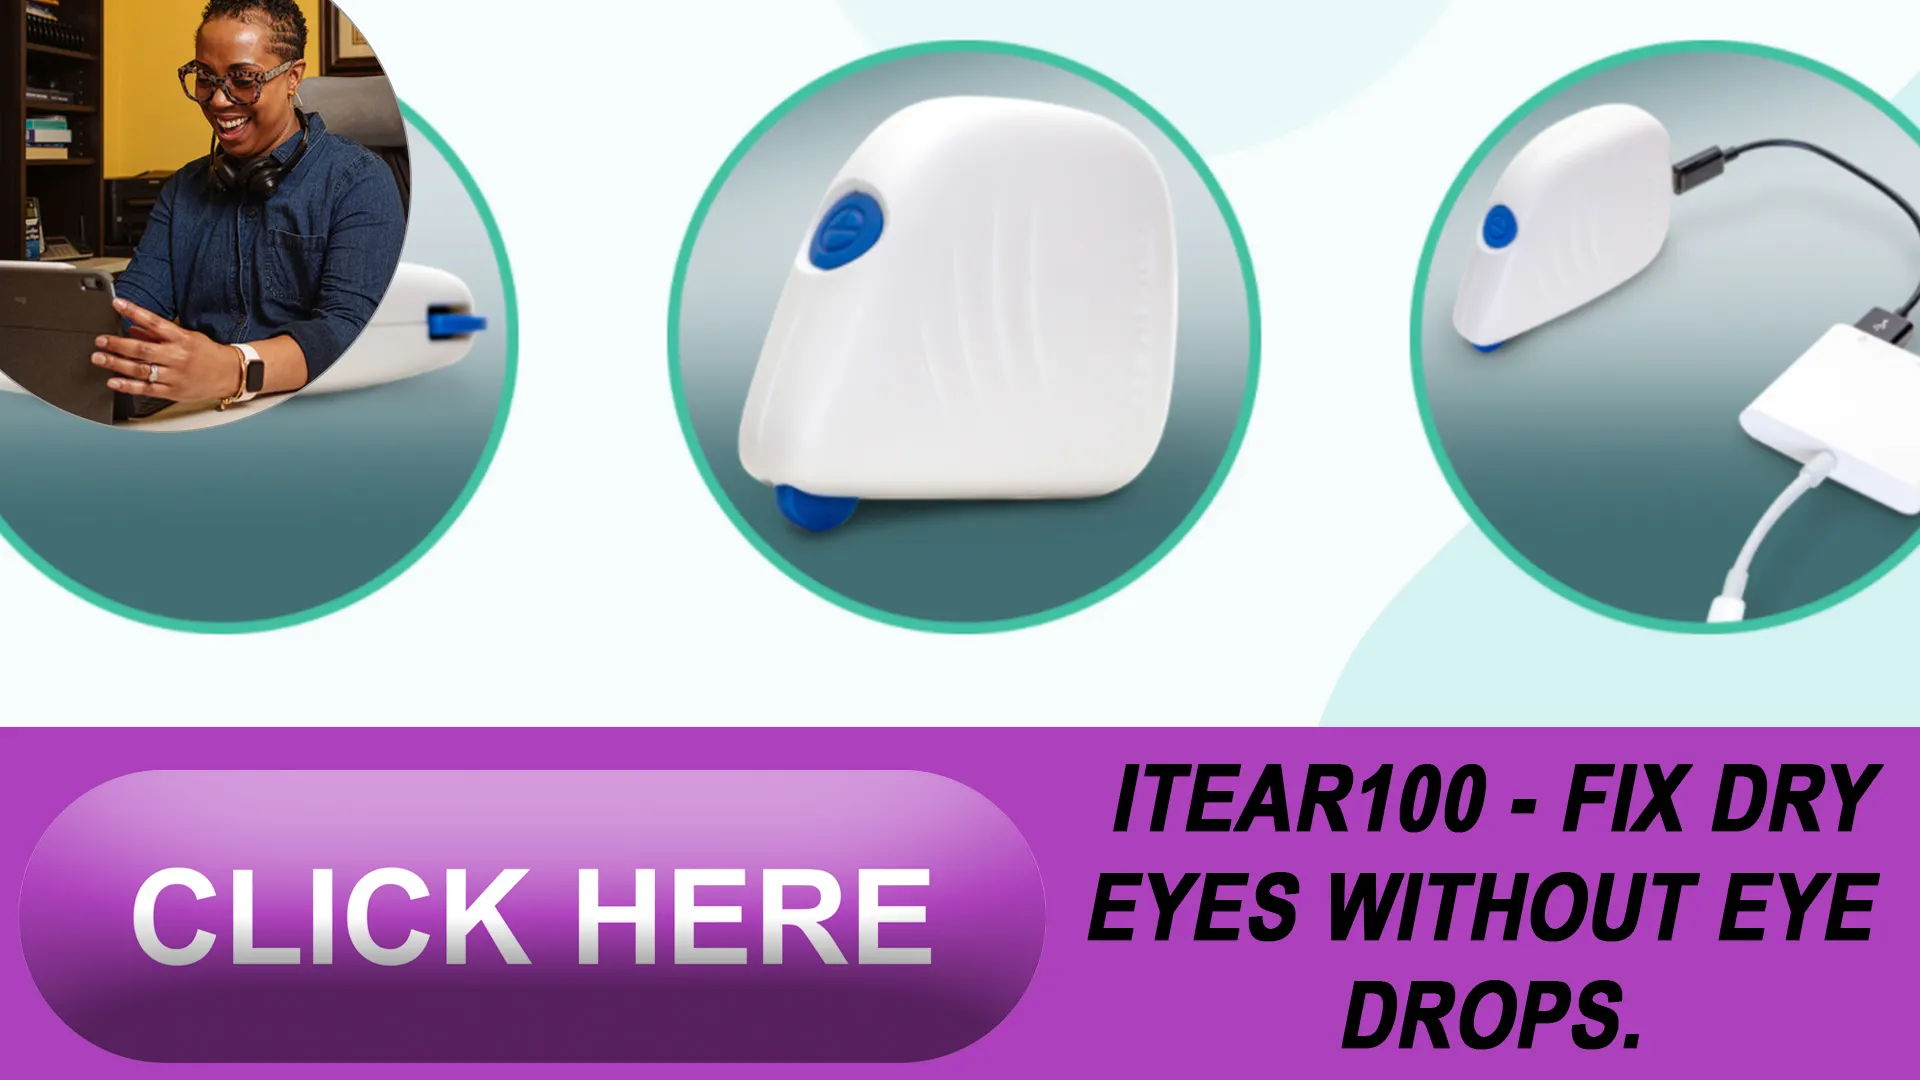 The Difference iTear100 Makes in Eye Care